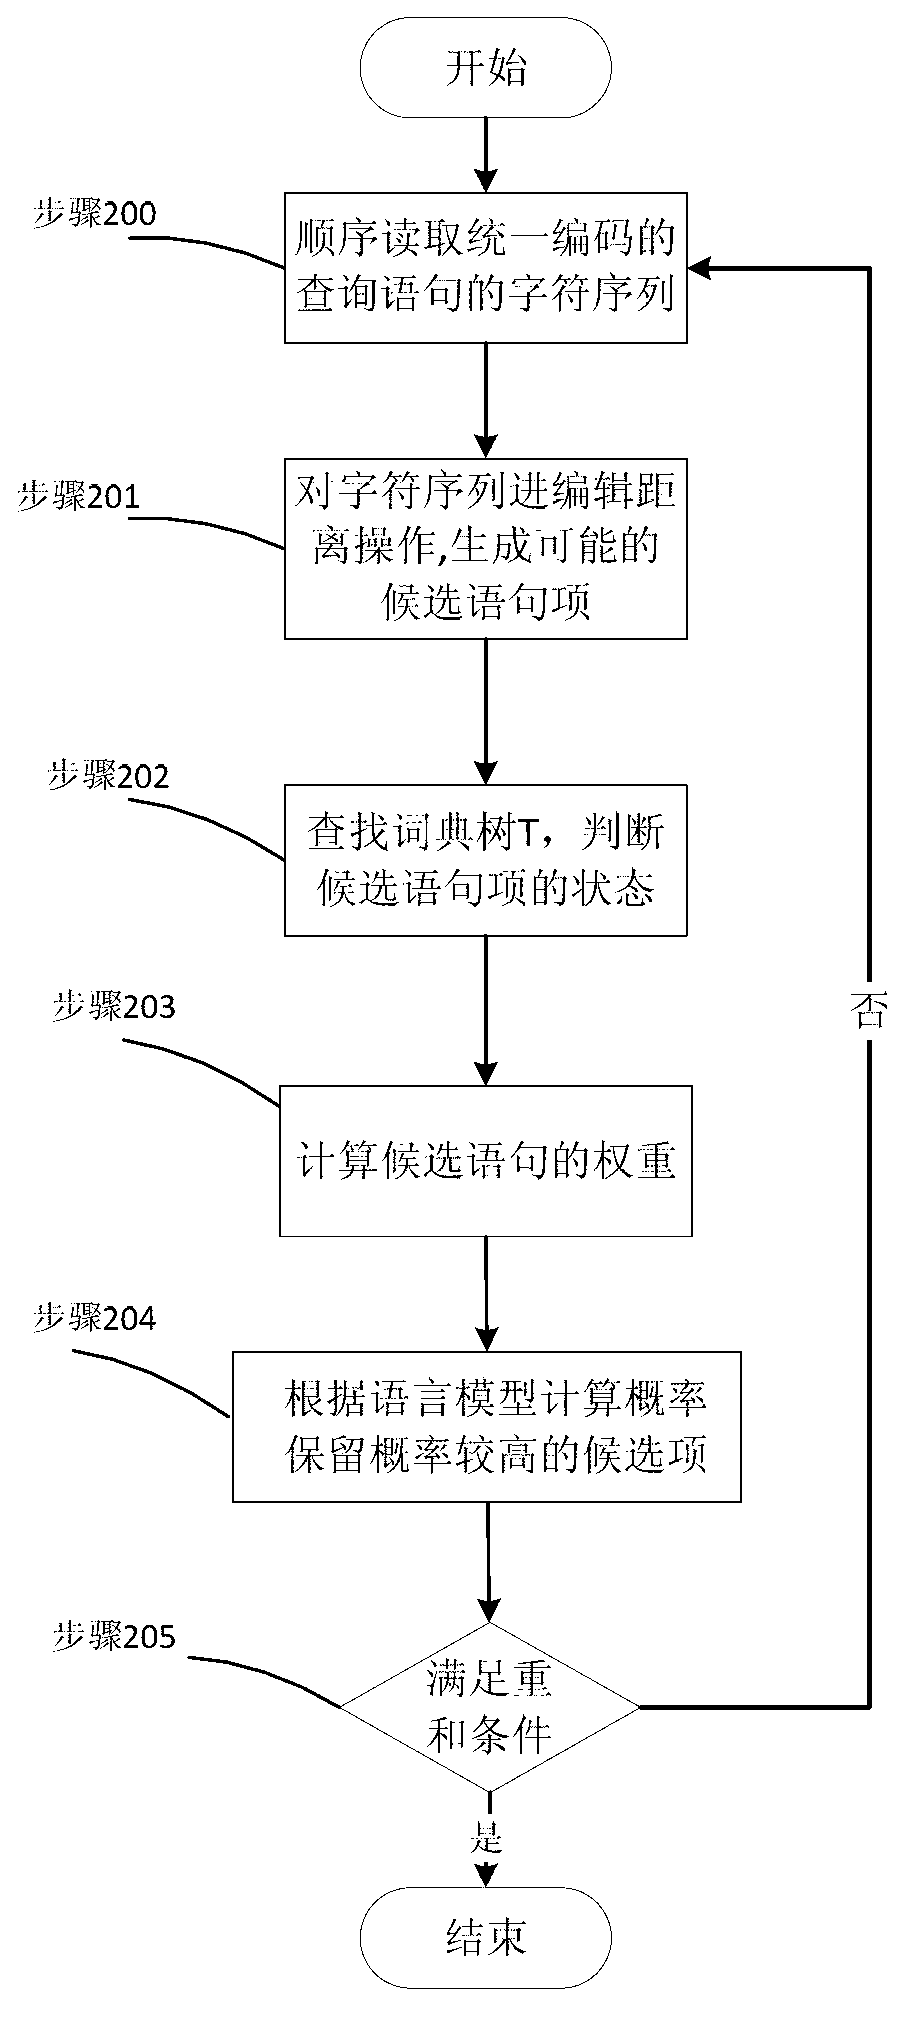 Method and system for query error correction